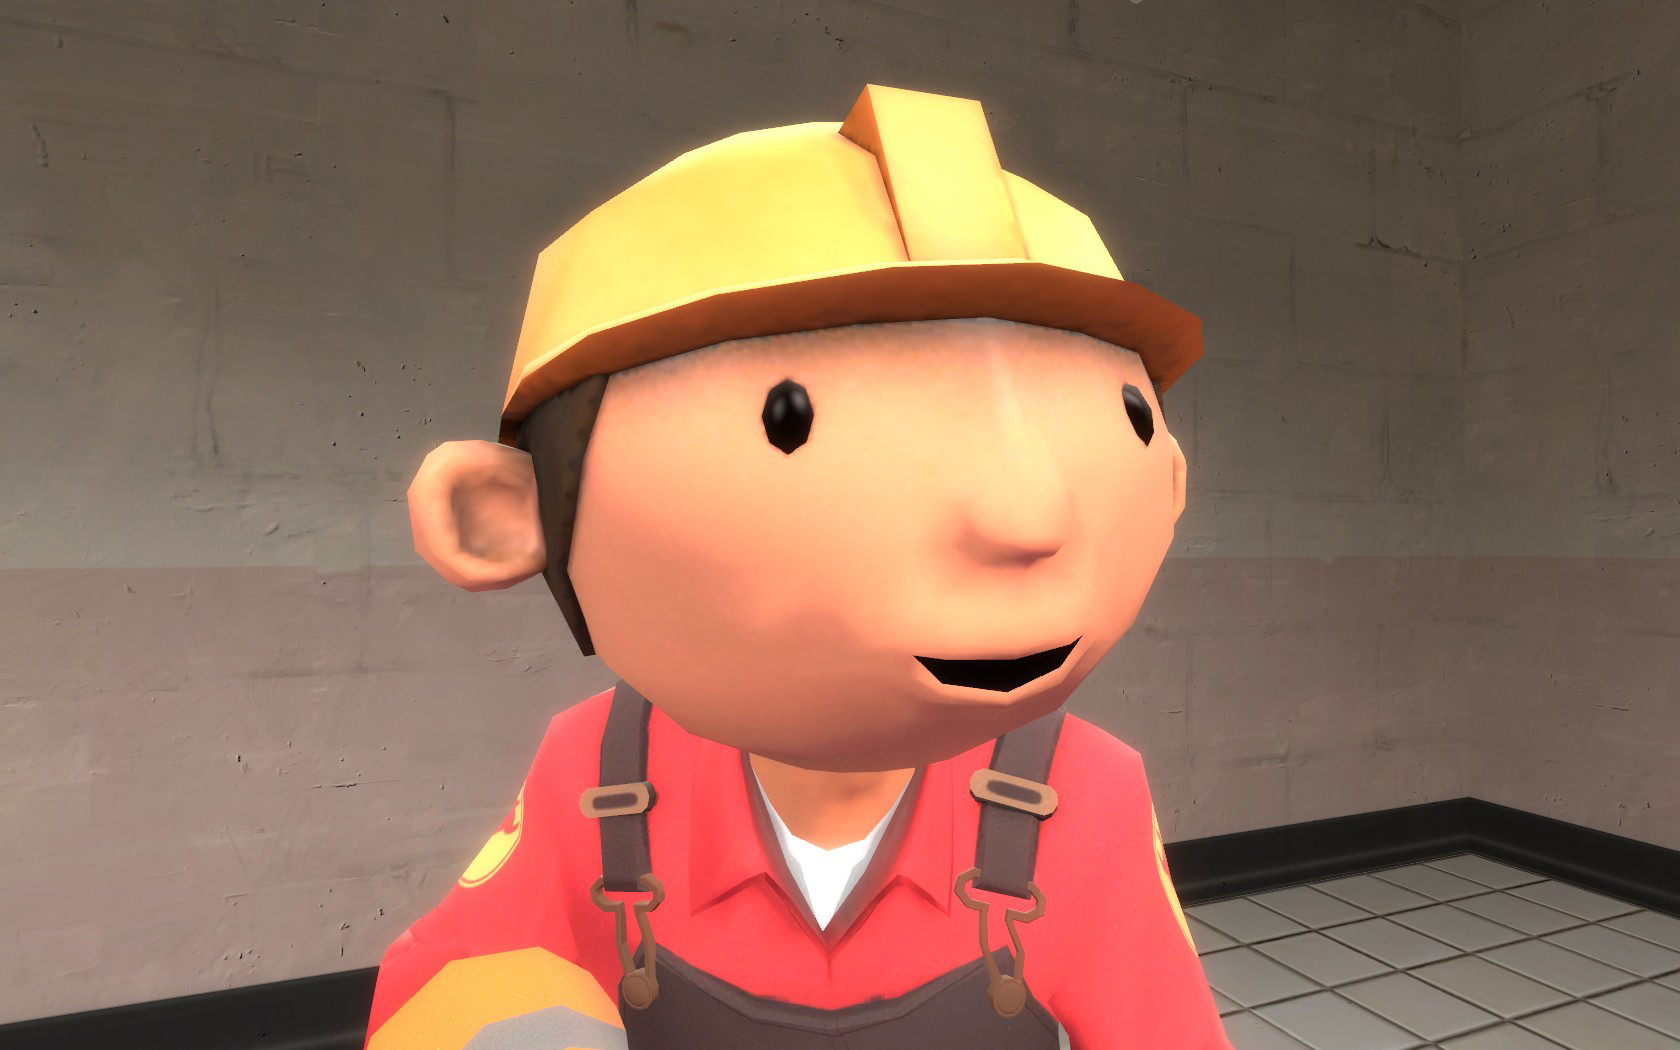 A Mod for Team Fortress 2. 